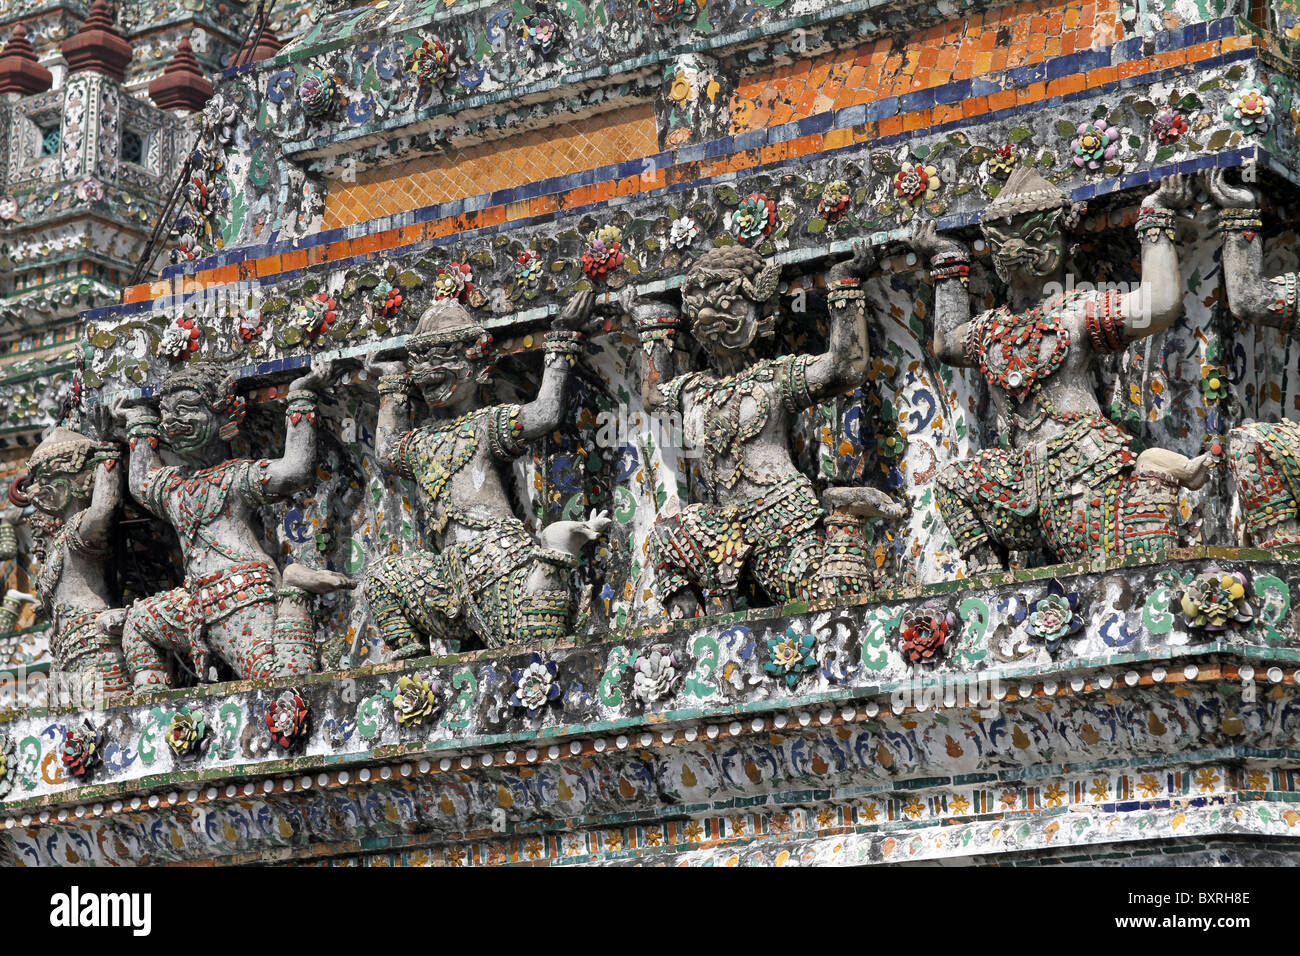 Statues on a Chinese porcelain prang at Wat Arun, Temple of the Dawn in Bangkok, Thailand Stock Photo